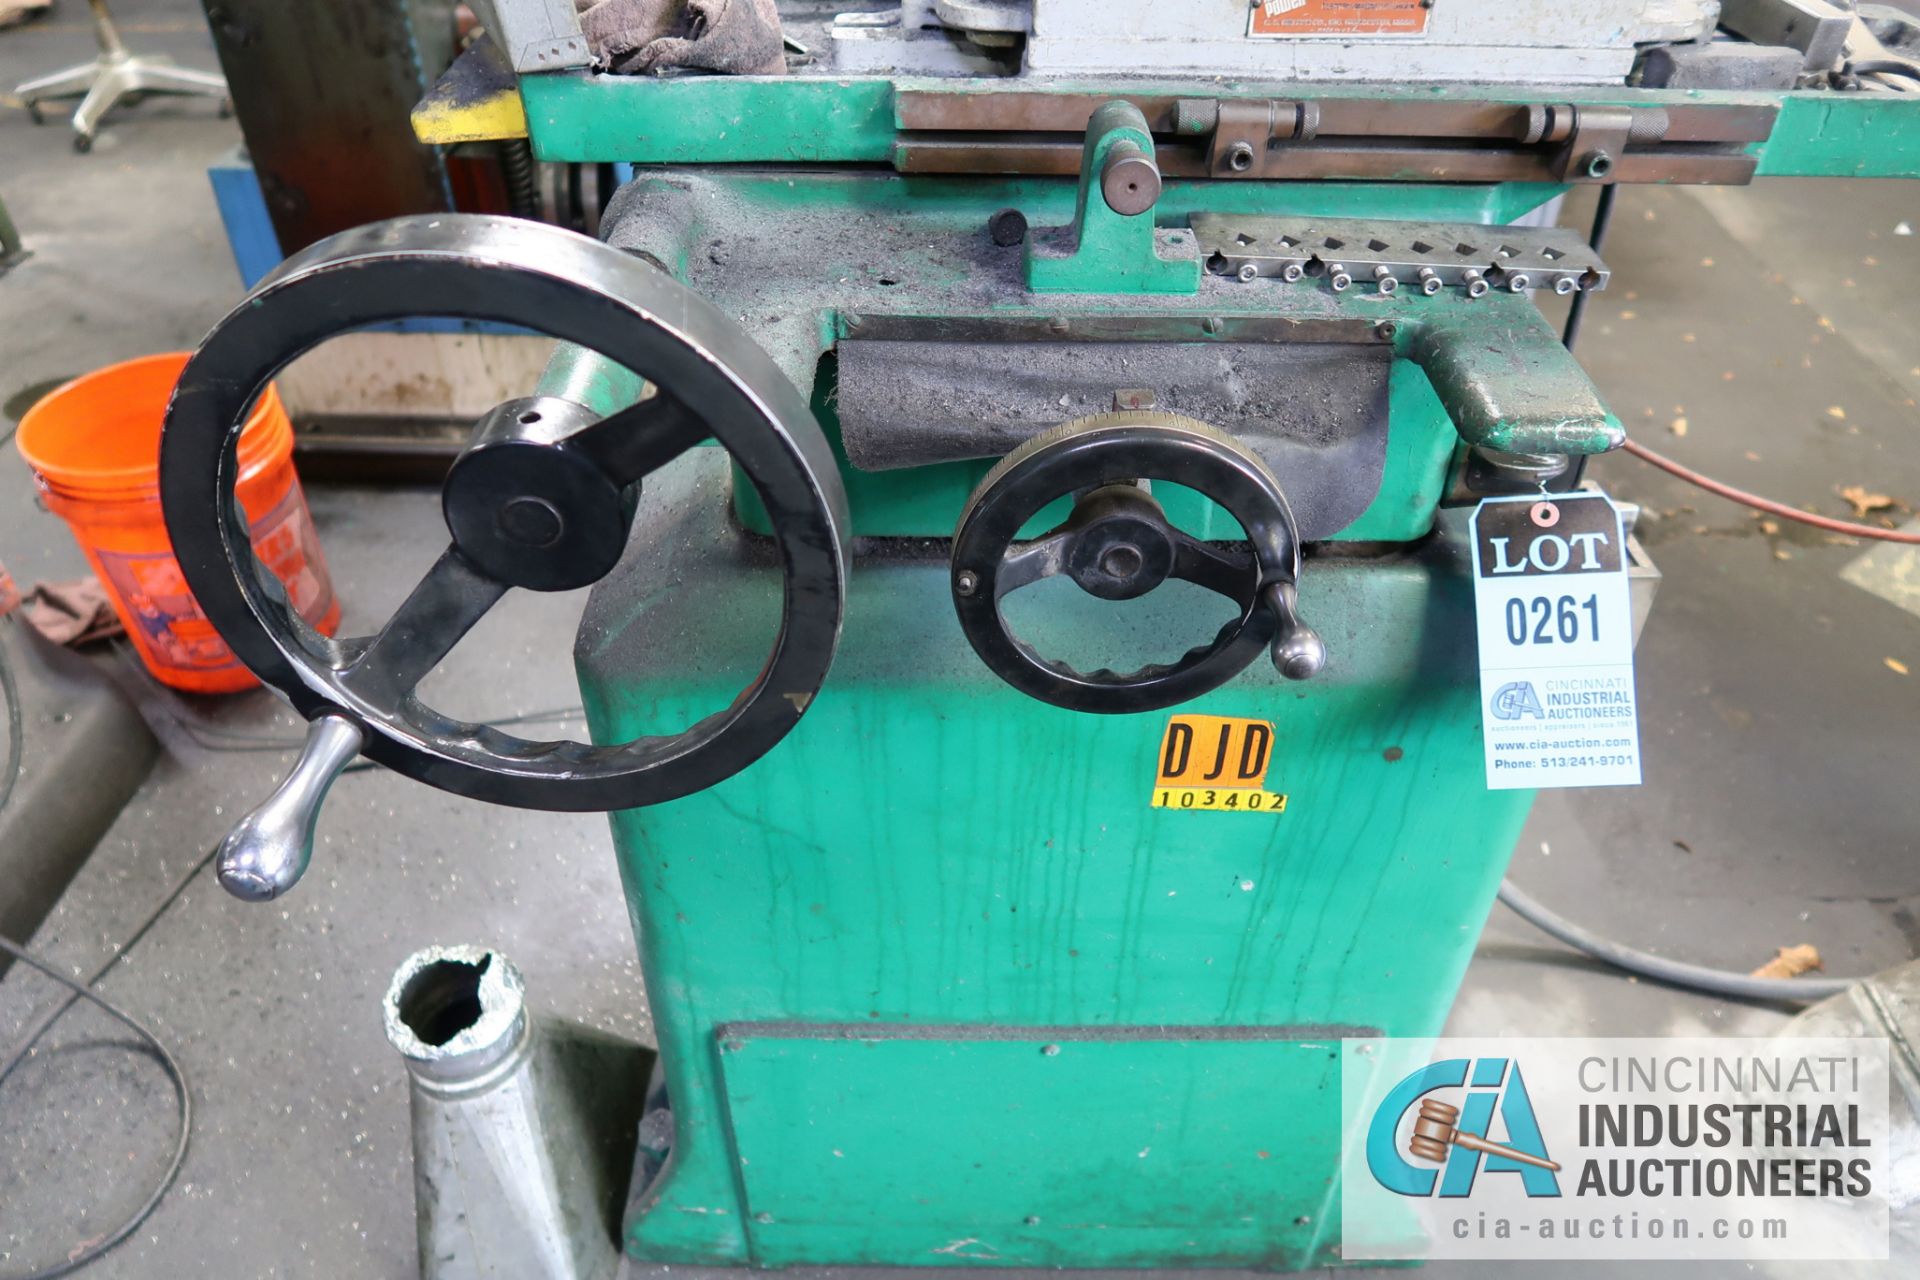 6" X 12" BOYER-SCHULTZ HAND FEED SURFACE GRINDER; S/N N/A, ASSET # 103402 **LOADING FEE DUE THE " - Image 4 of 4